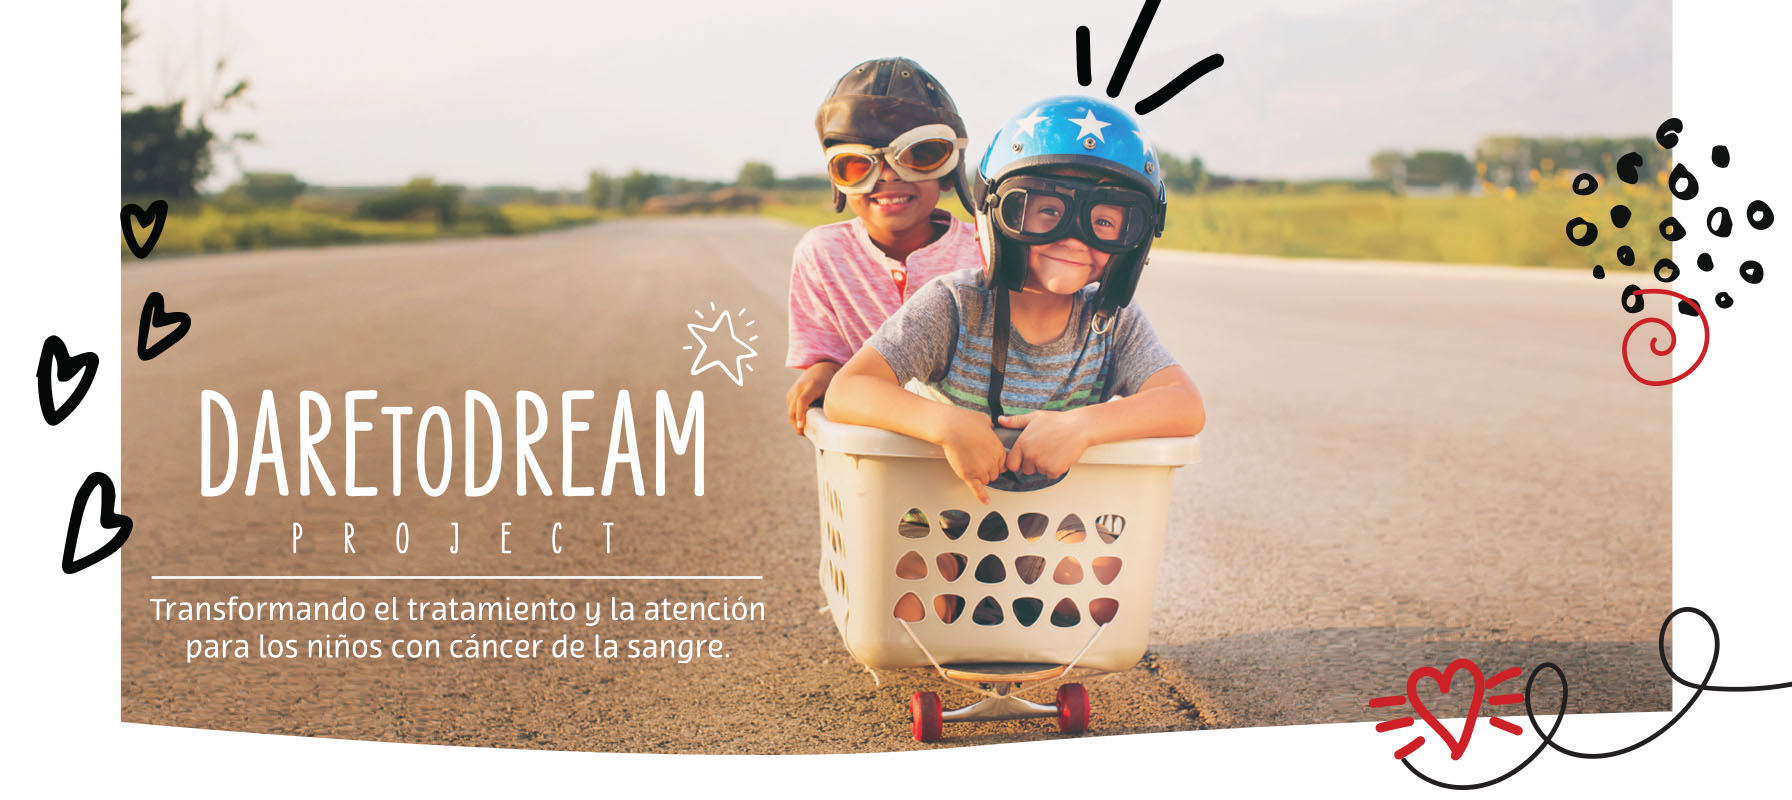 The Dare to Dream Project – Transforming treatment and carefor kids with blood cancer.